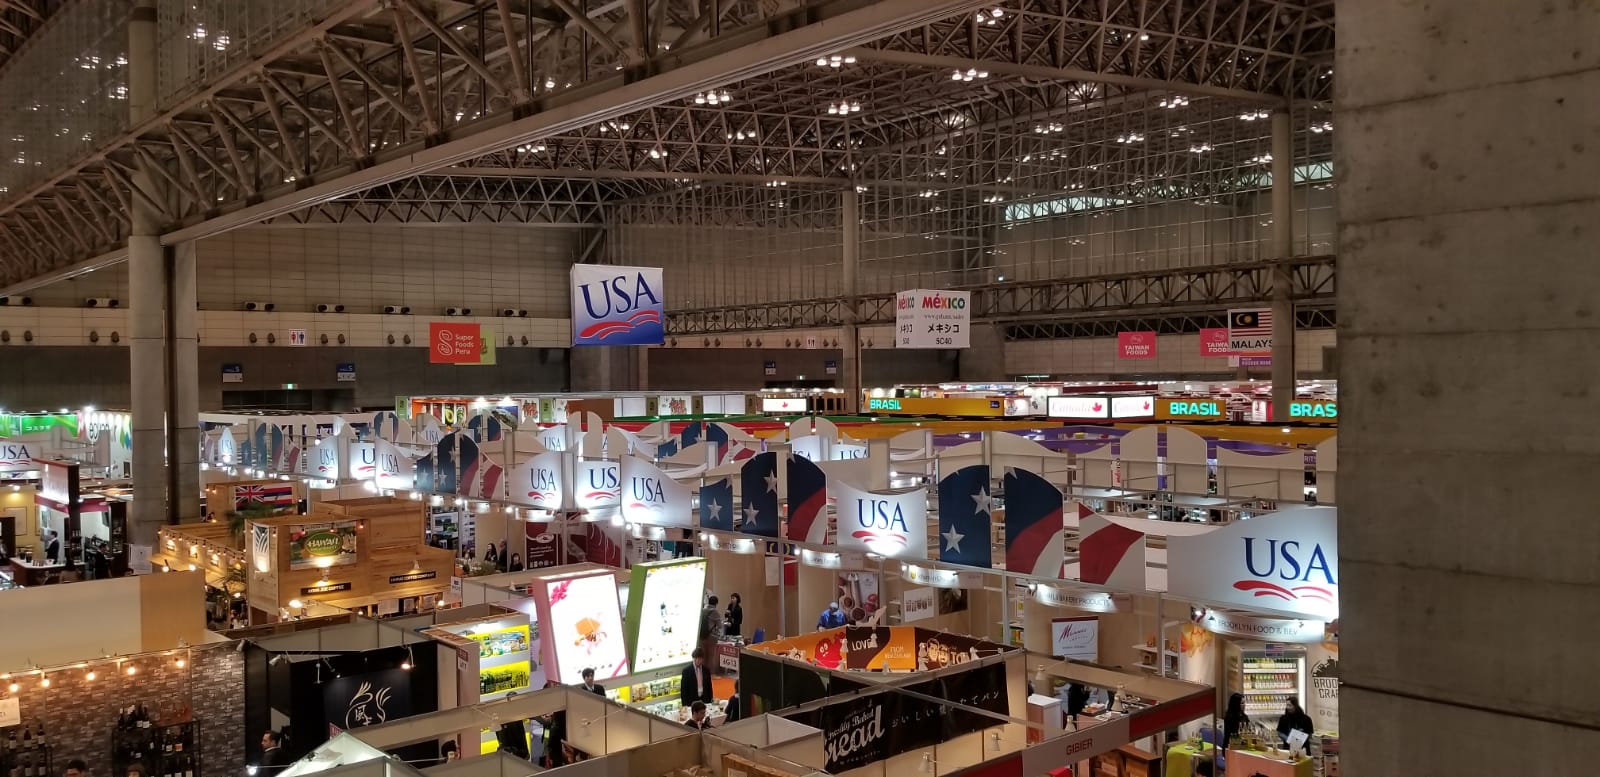 FOODEX - Show Floor From Above